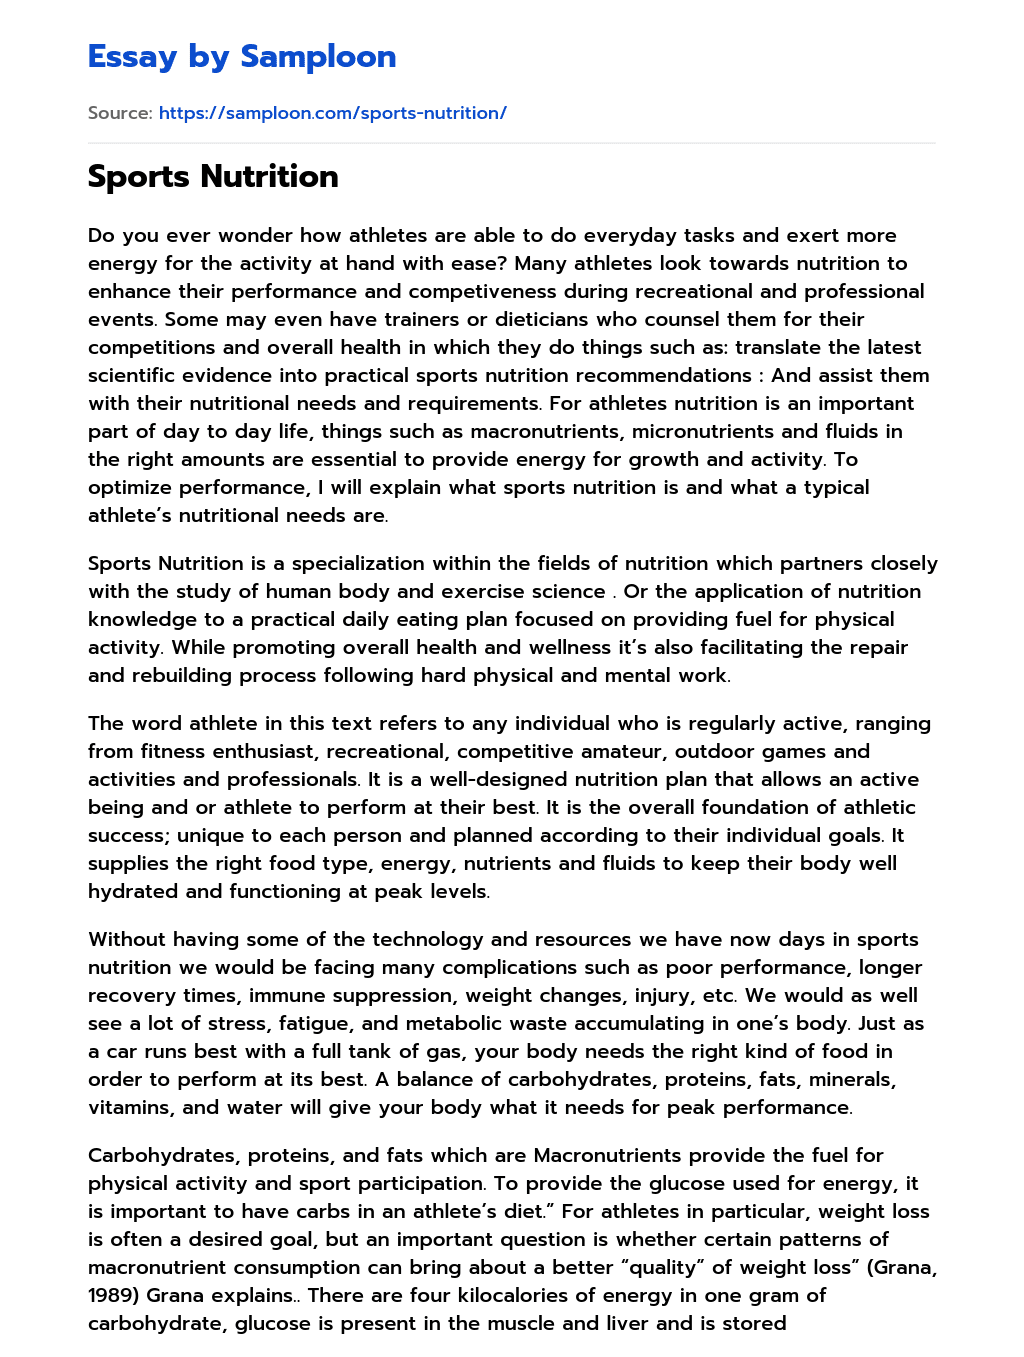 essay on nutrition in sports in 300 words